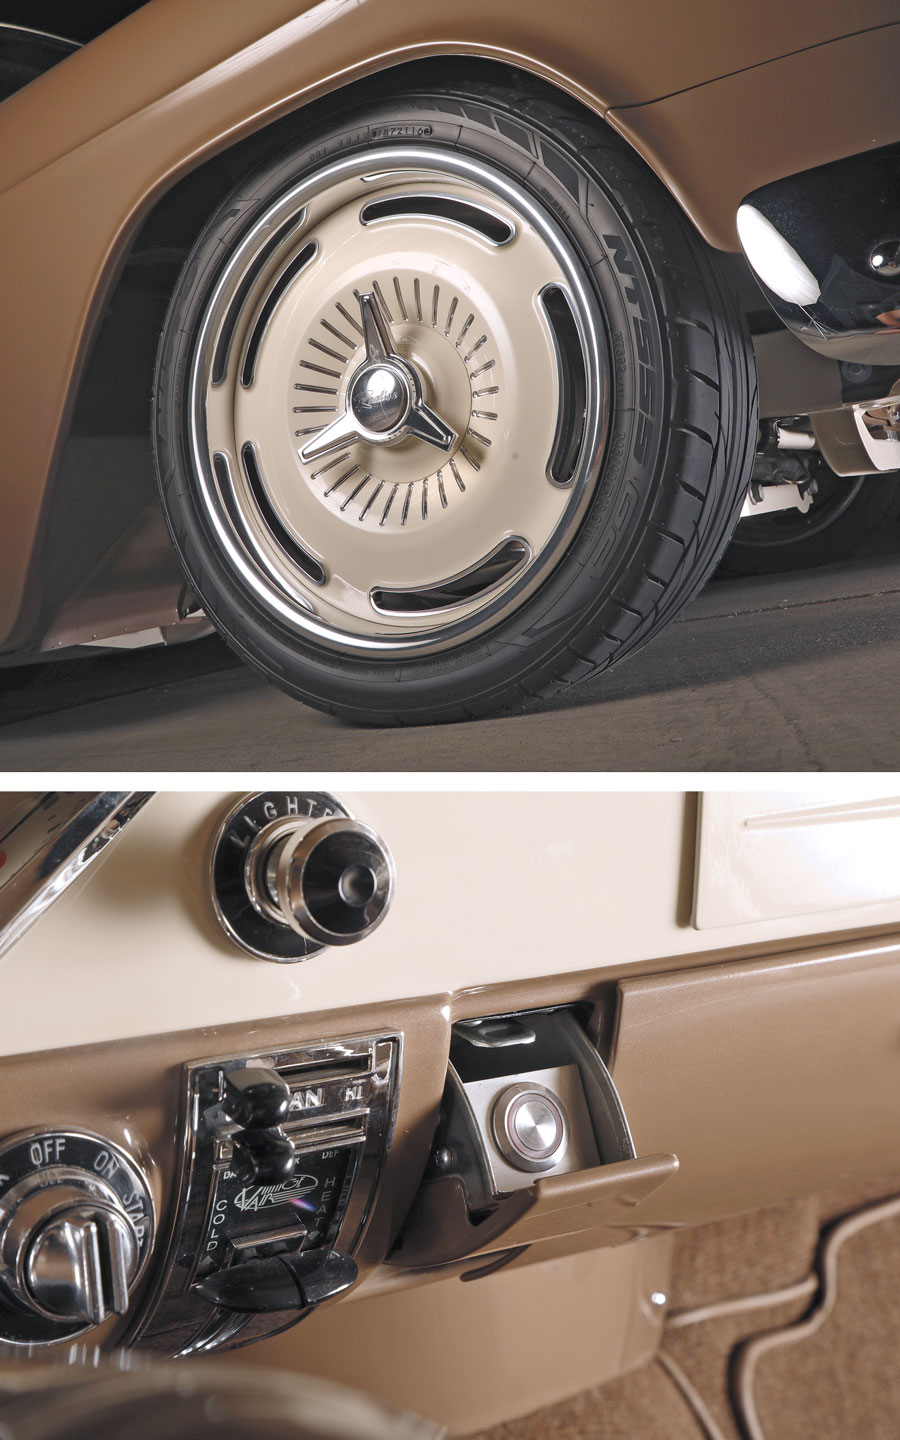 Tires and inside features of 1955 Chevy